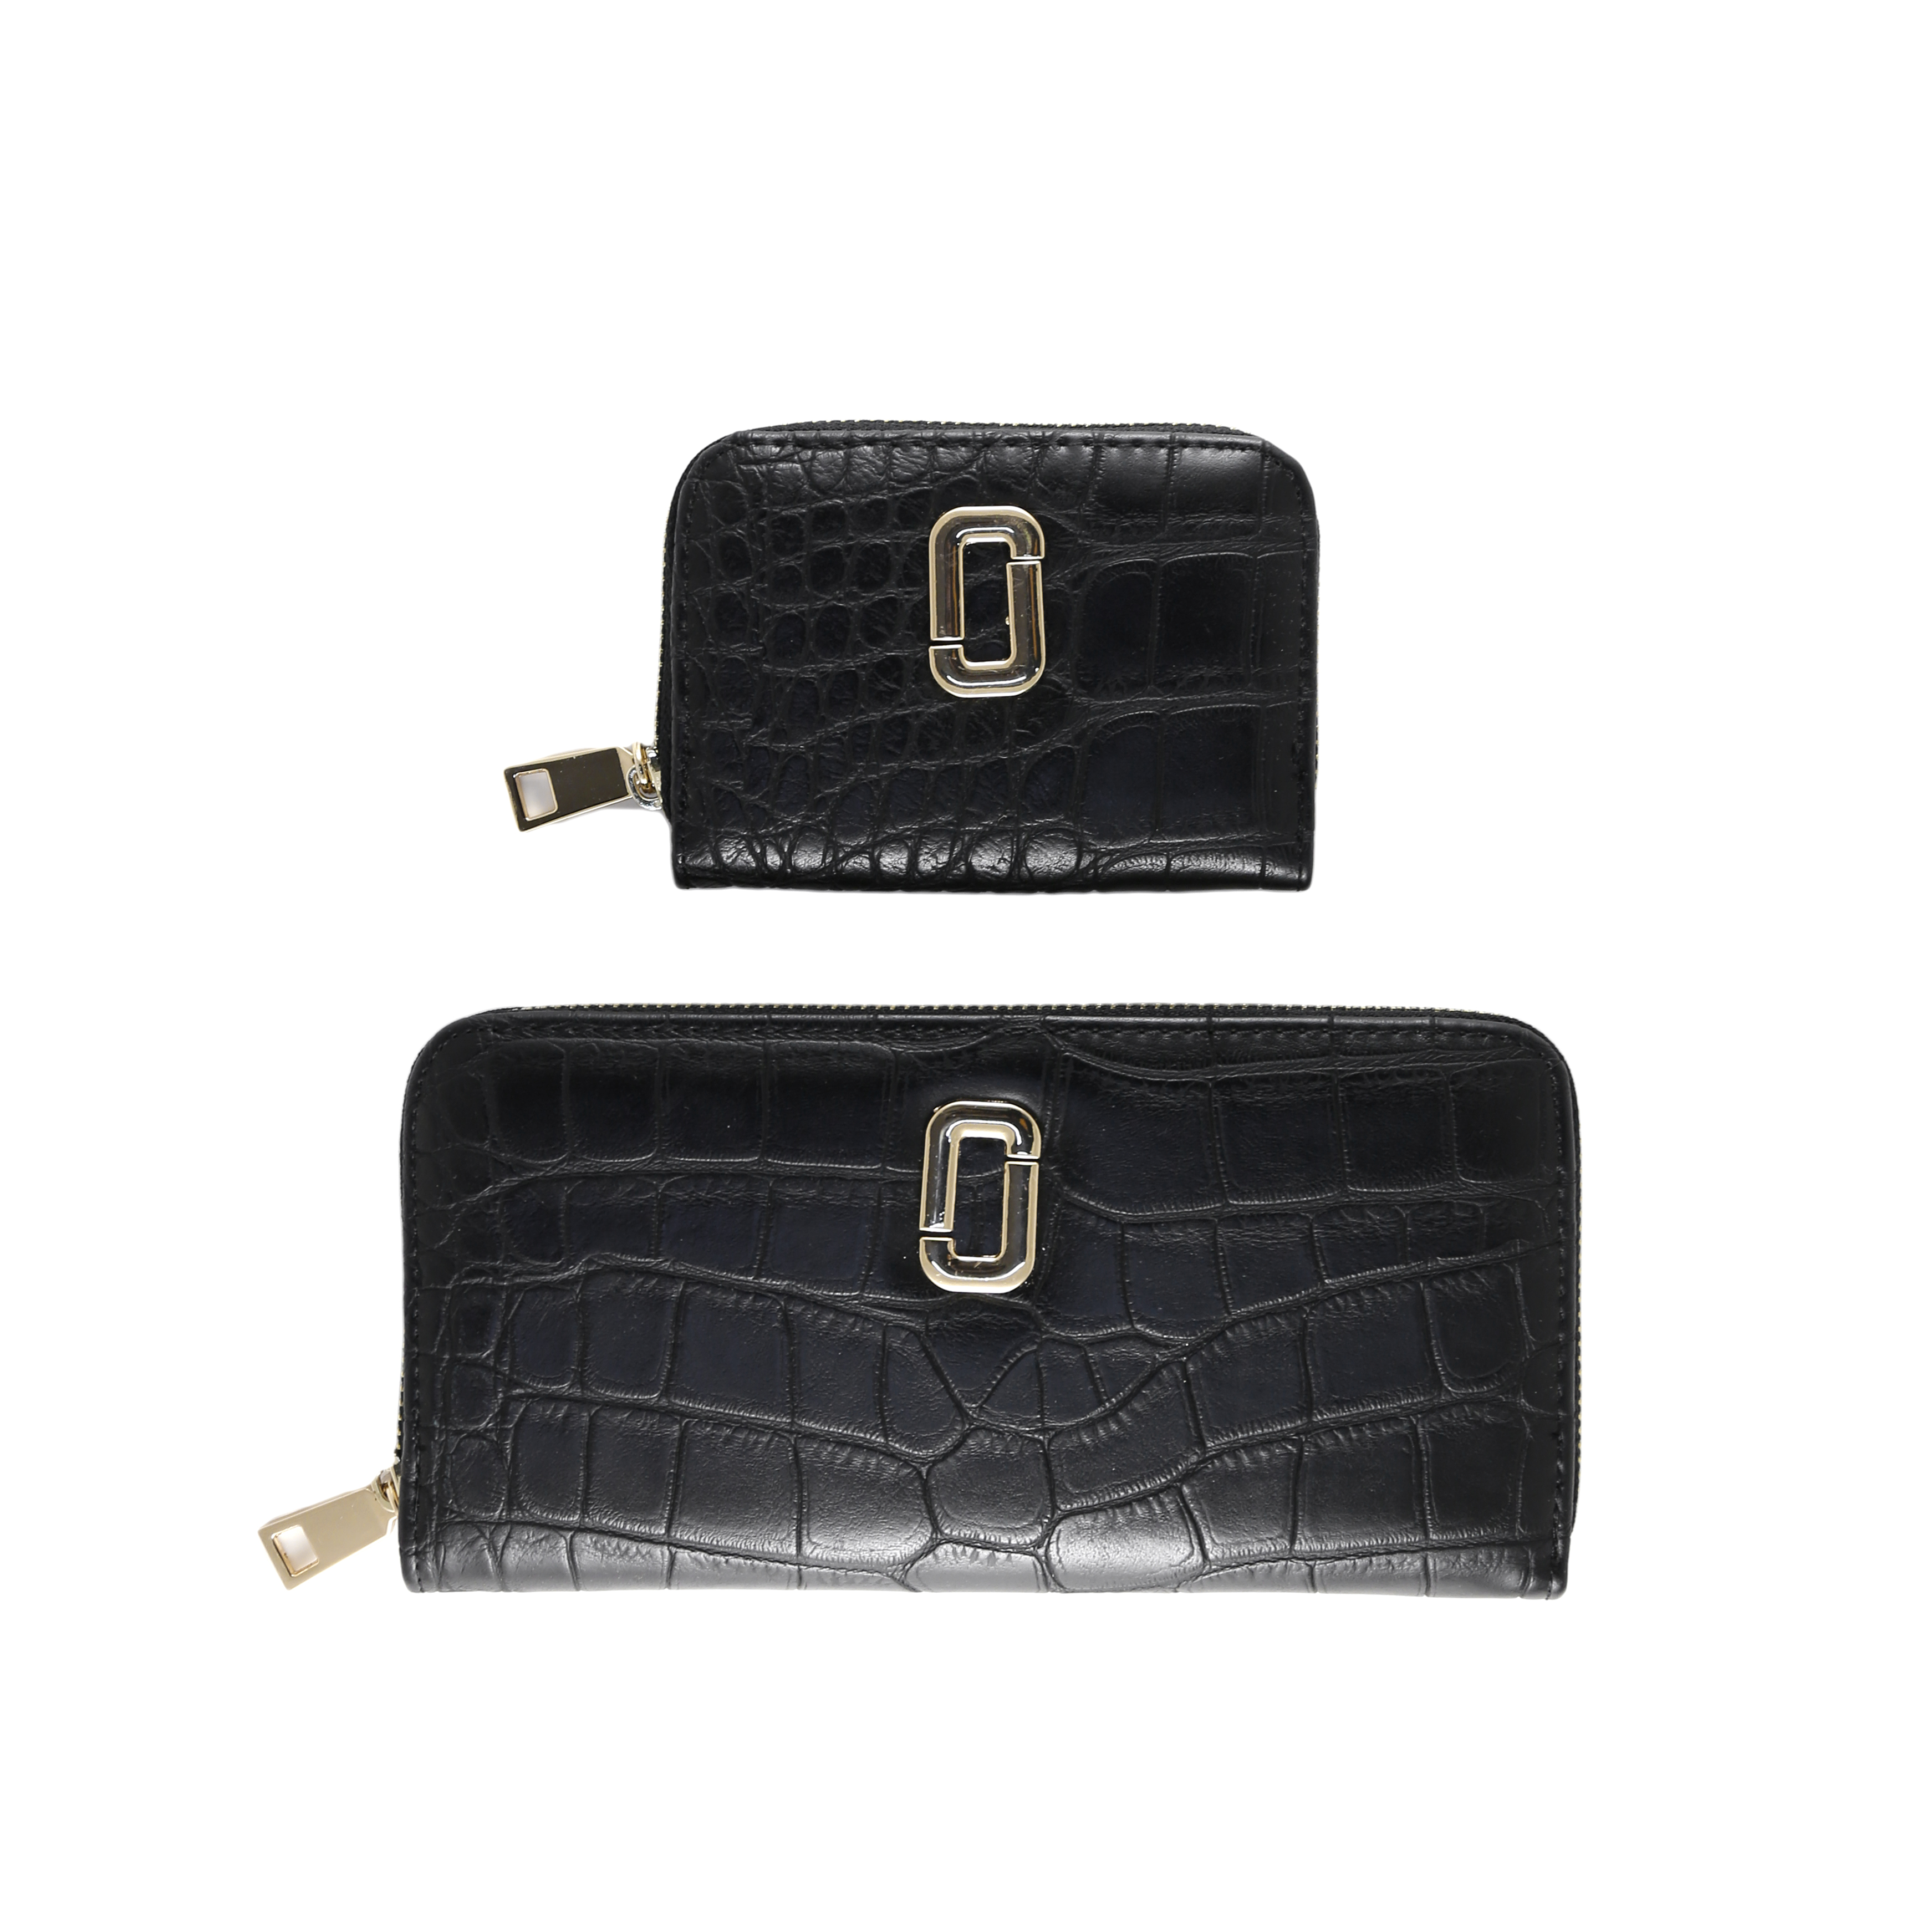 Accessories Woman Wallets MACFLY SET CROCO